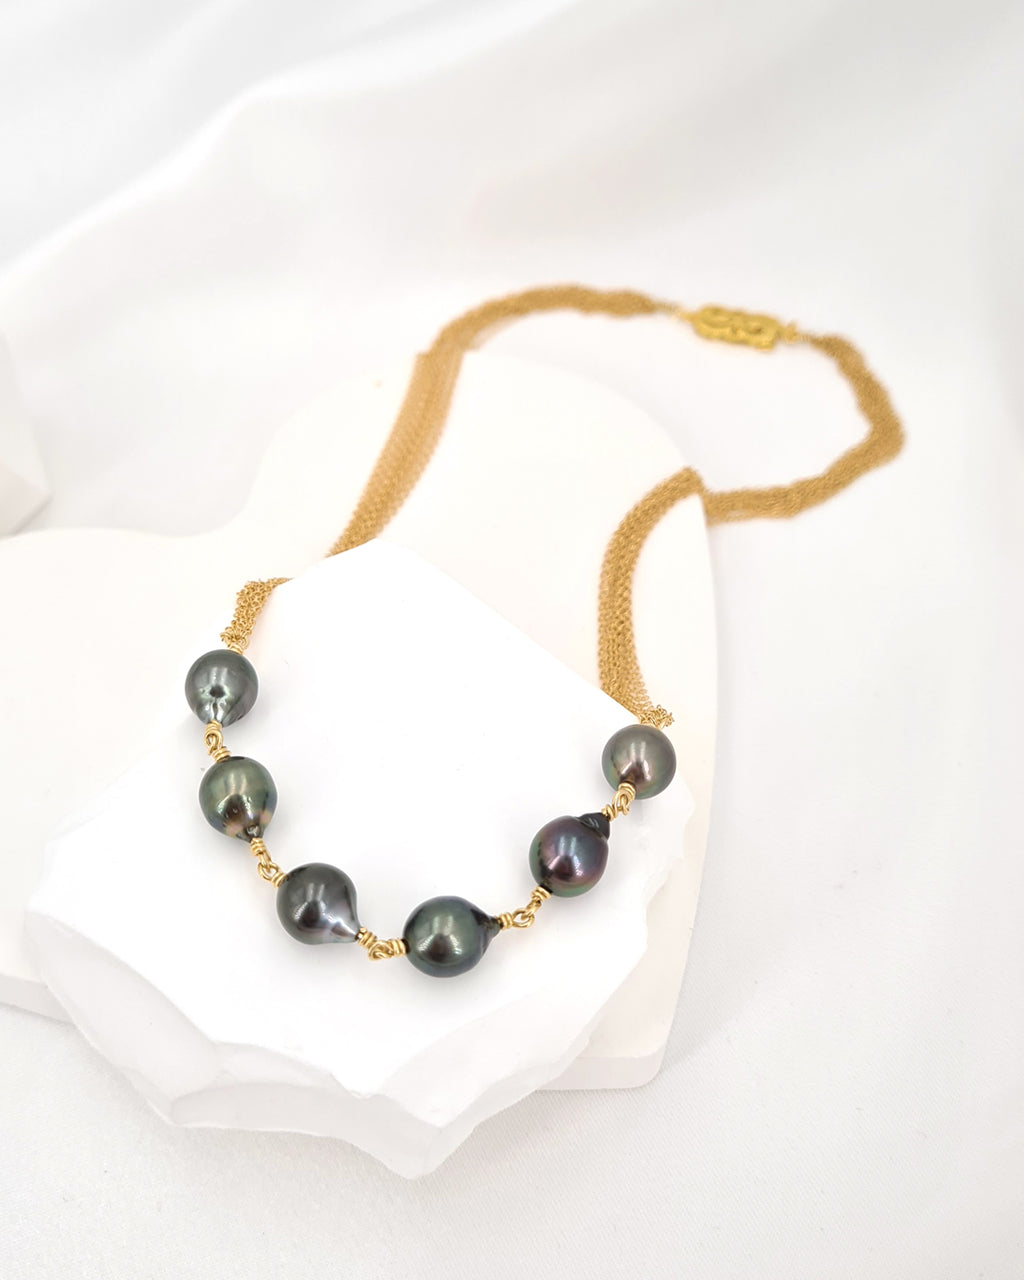 Tahitian Pearl Necklace - 14k gold filled pearl jewelry, handmade in Singapore